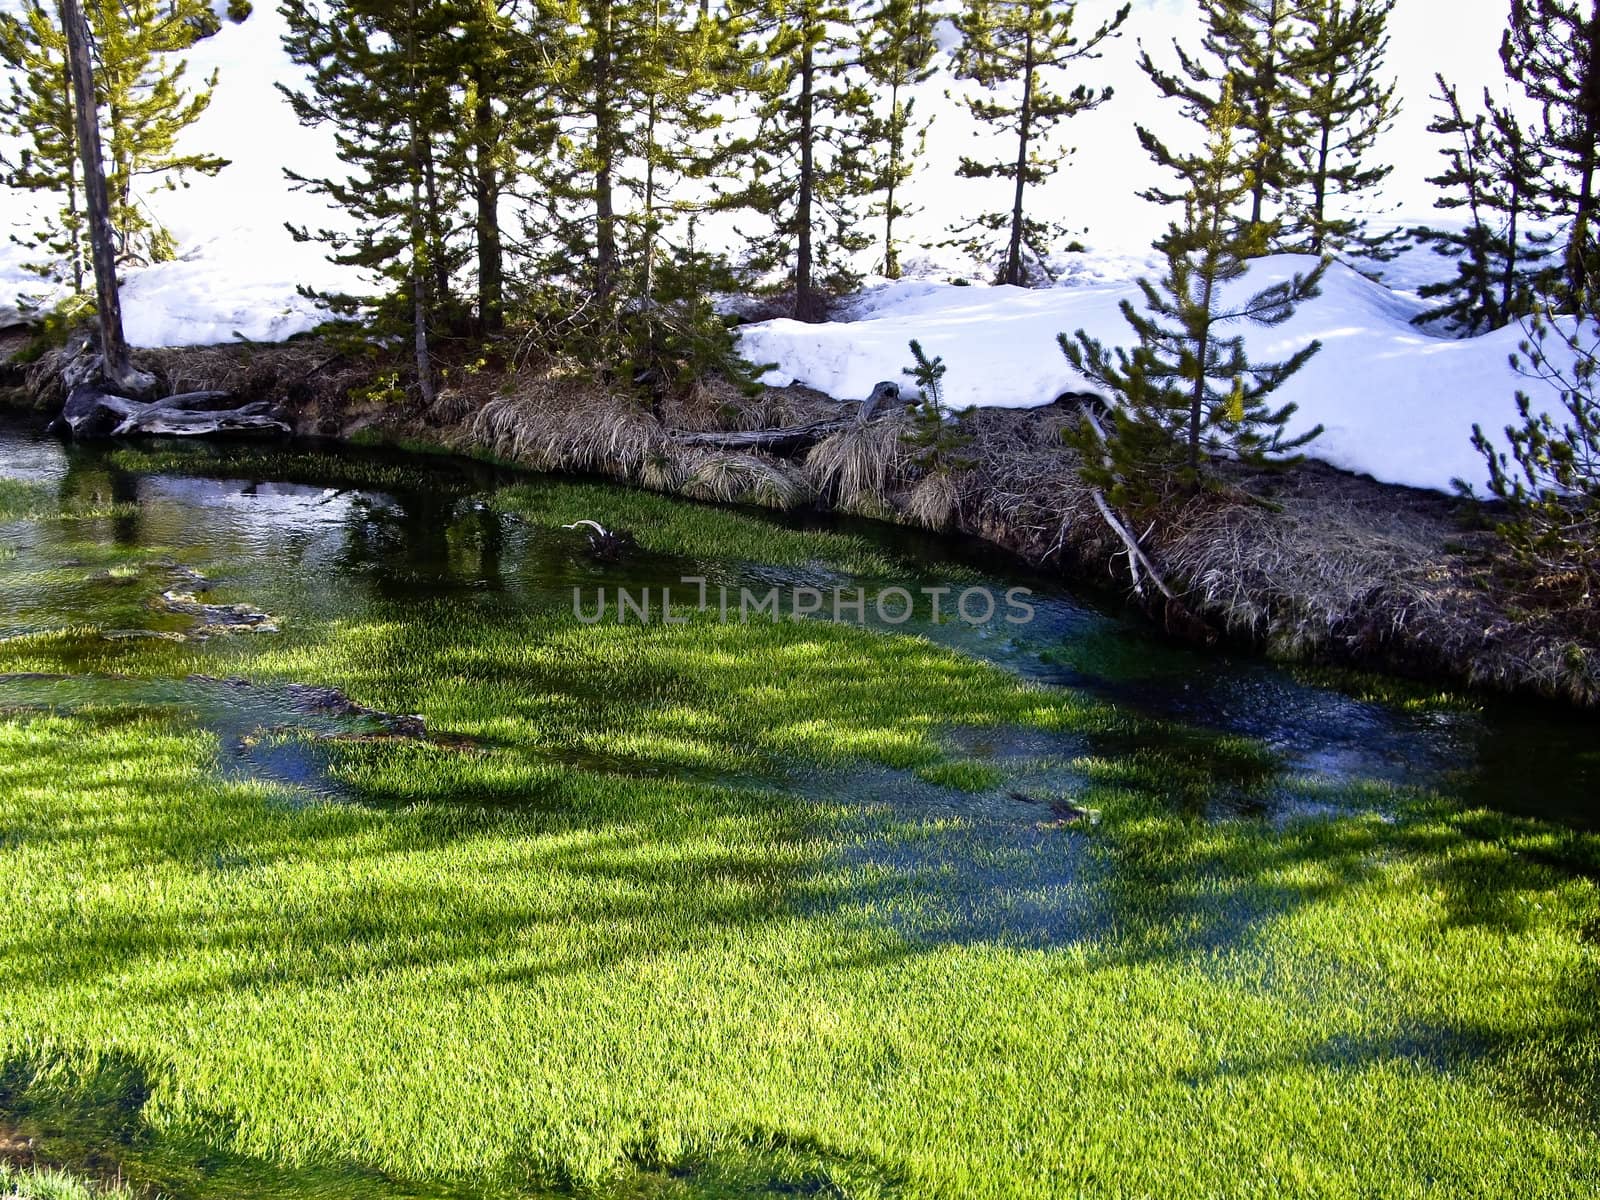 Grass grows in river in Yellowstone Park, Wyoming USA